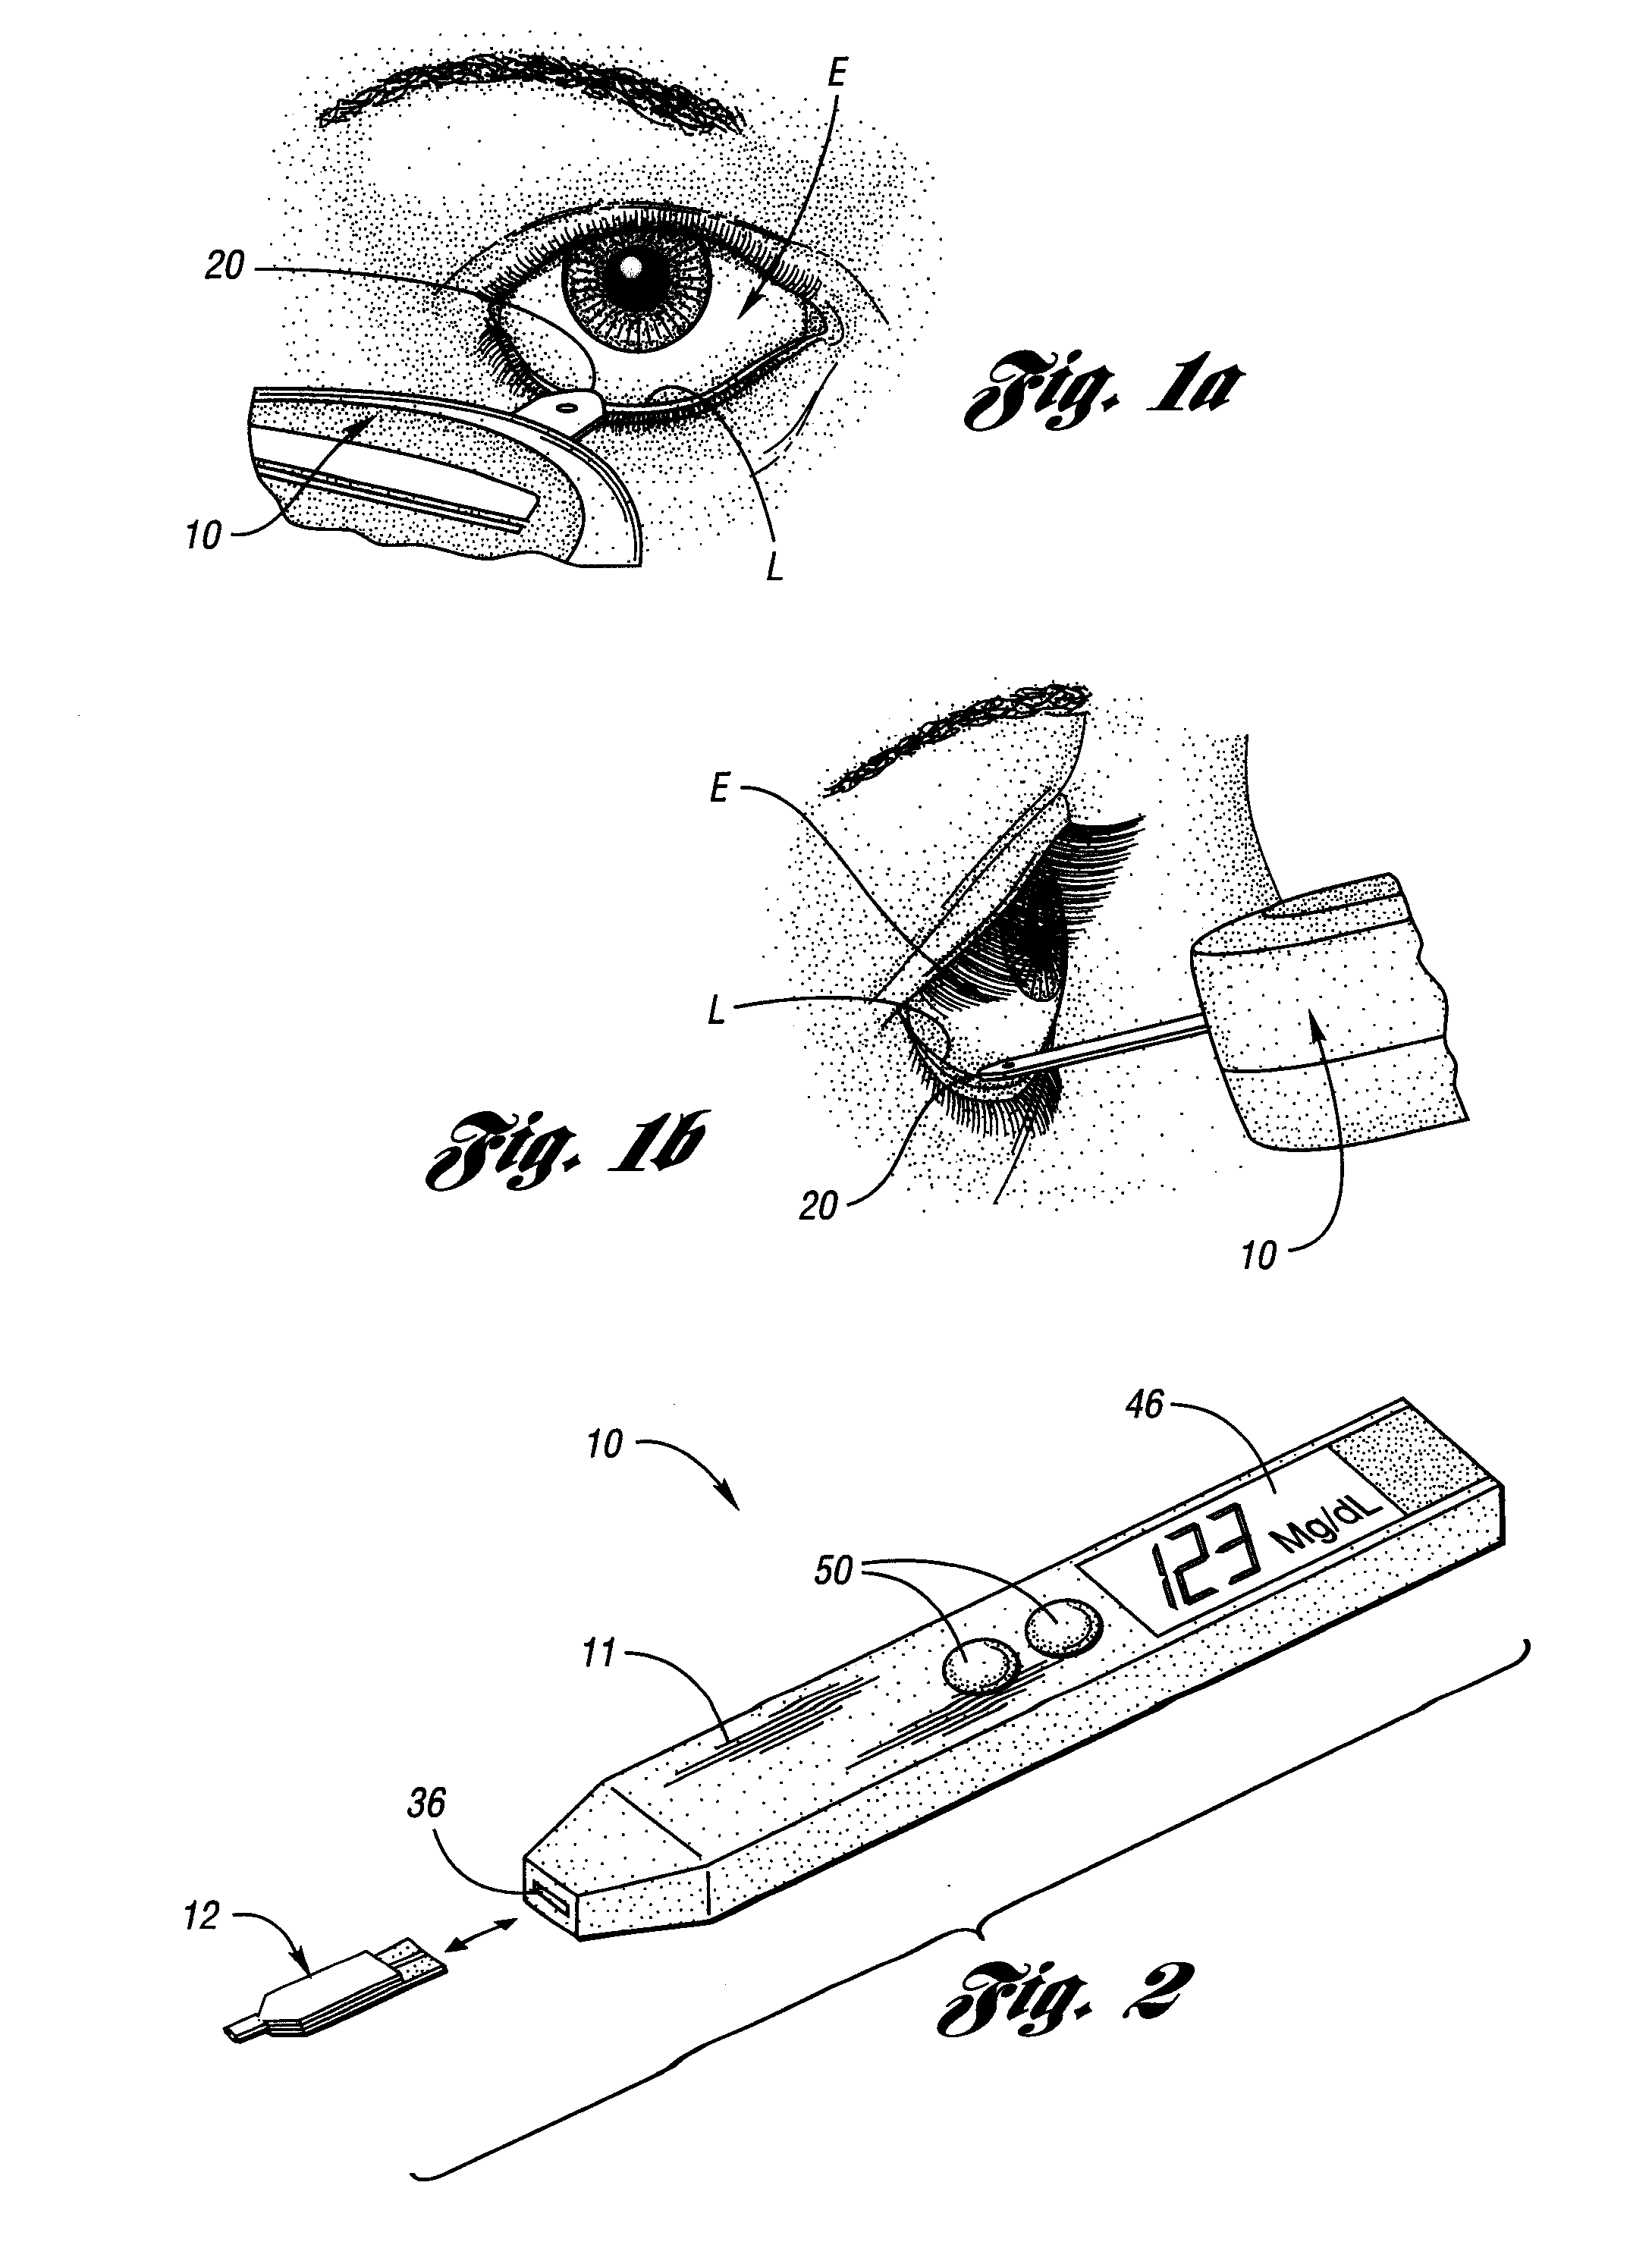 Method and Apparatus for Non-Invasive Monitoring of Blood Substances Using Self-Sampled Tears